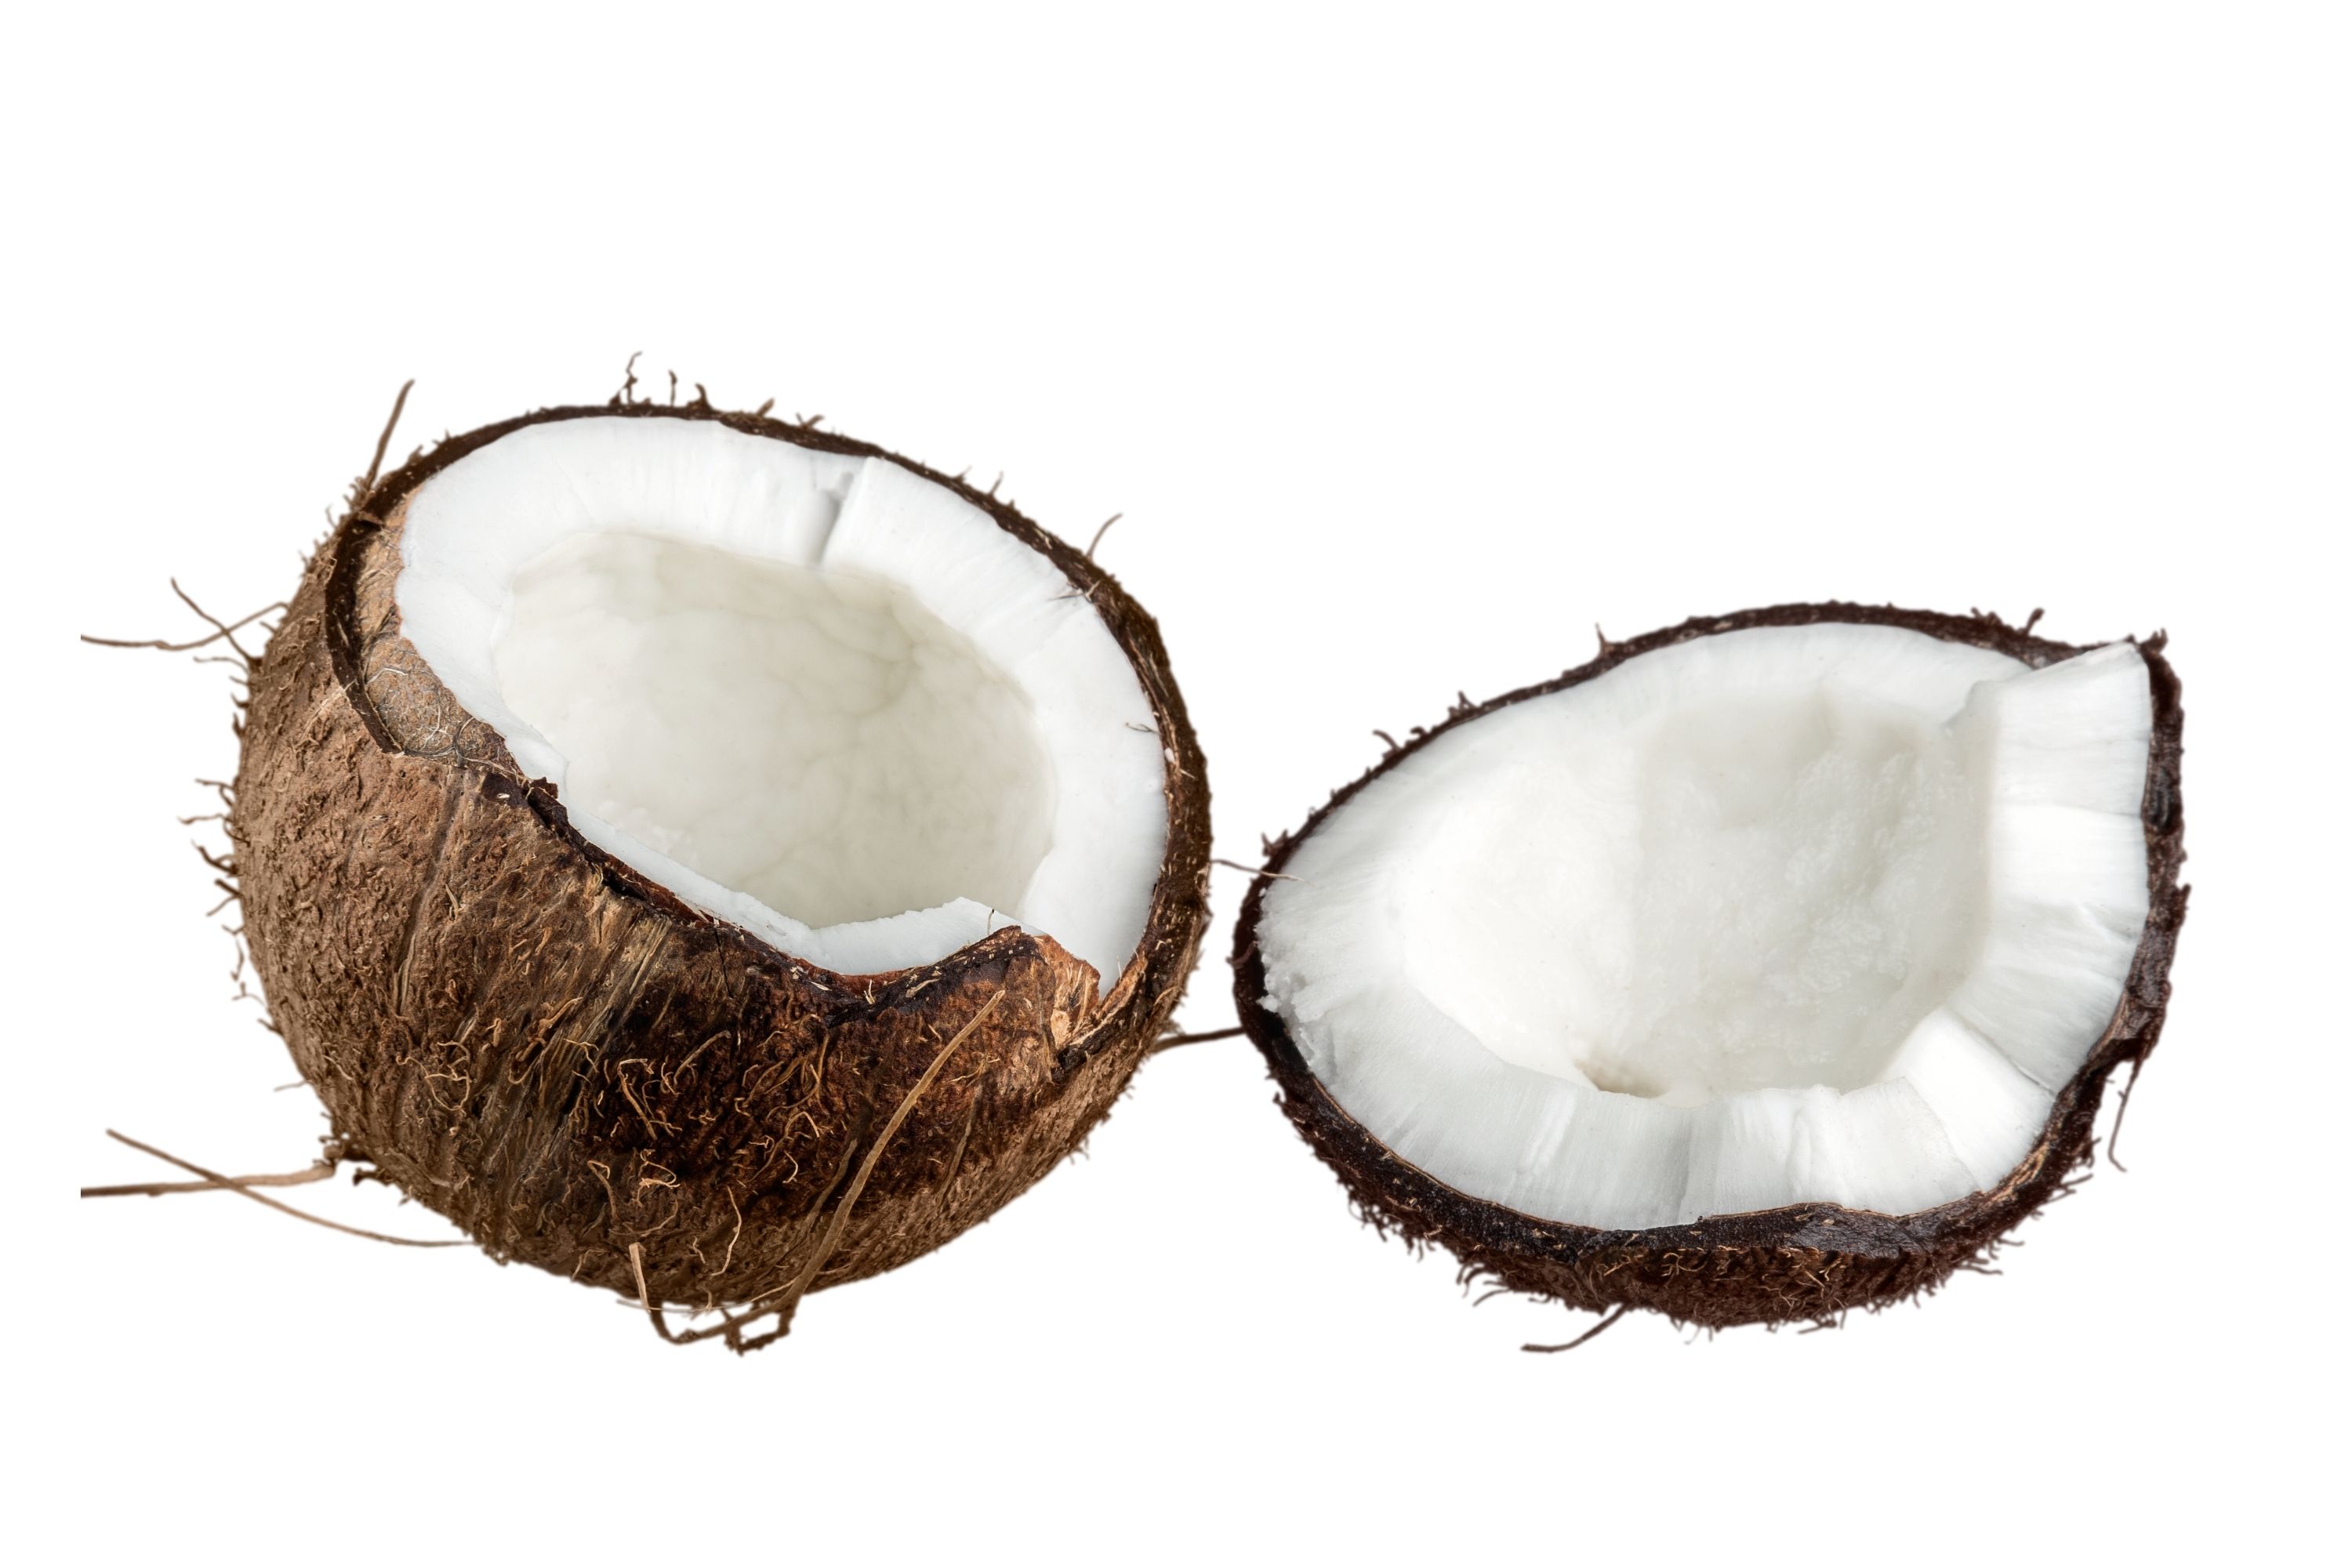 Coconut Classification. Is It a Fruit, a Nut, Or a Seed